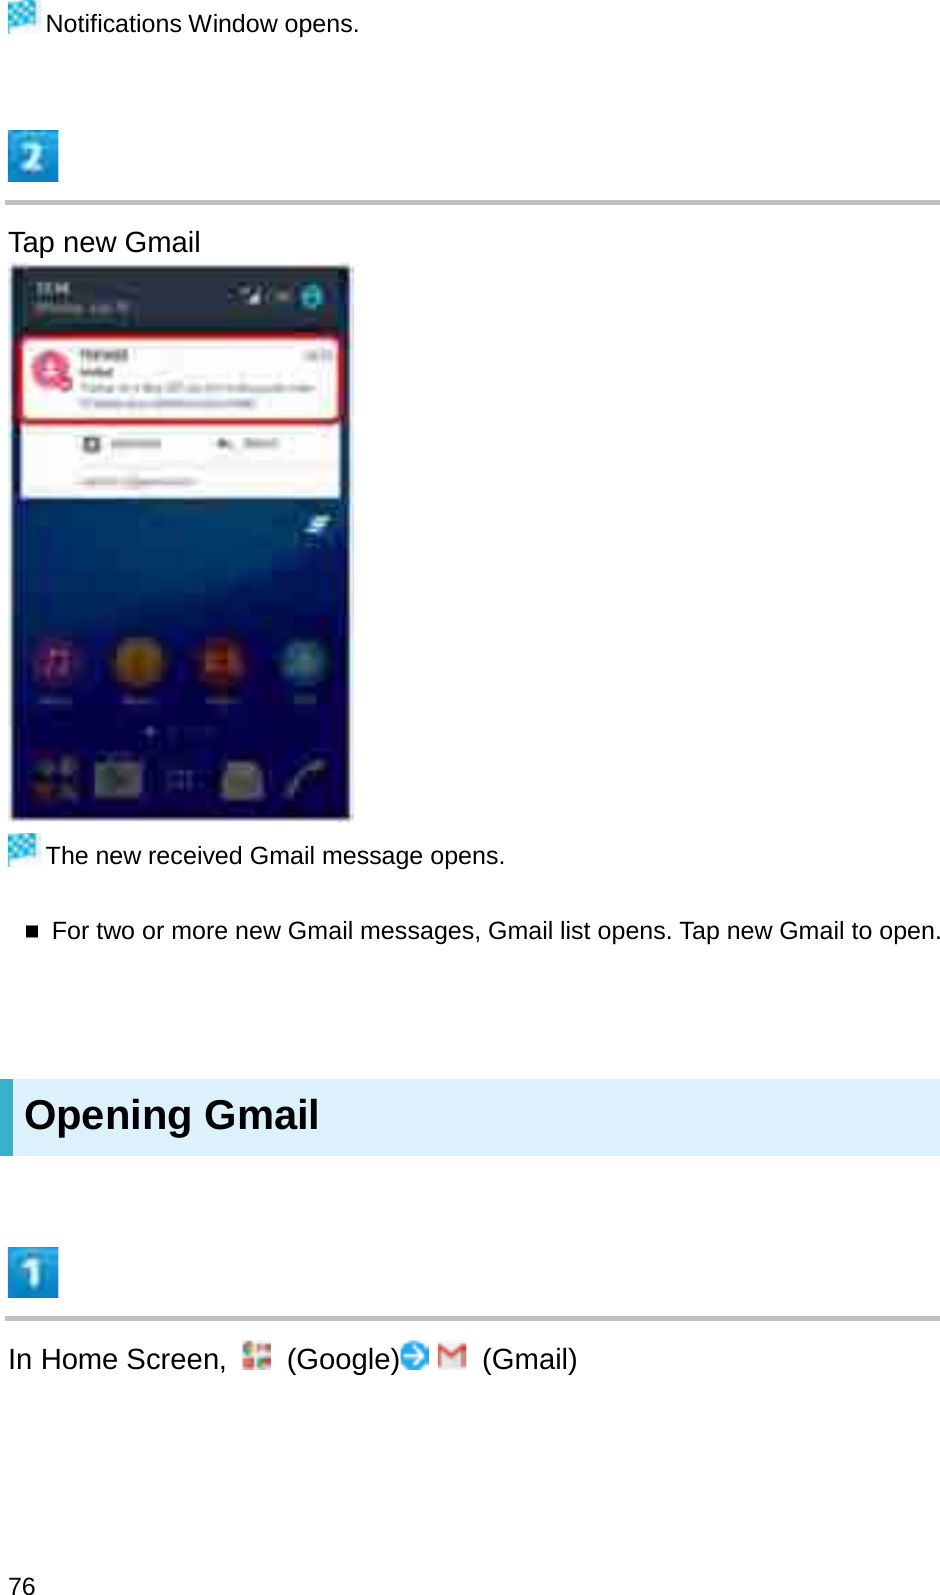 Notifications Window opens.Tap new GmailThe new received Gmail message opens.For two or more new Gmail messages, Gmail list opens. Tap new Gmail to open.Opening GmailIn Home Screen,  (Google) (Gmail)76